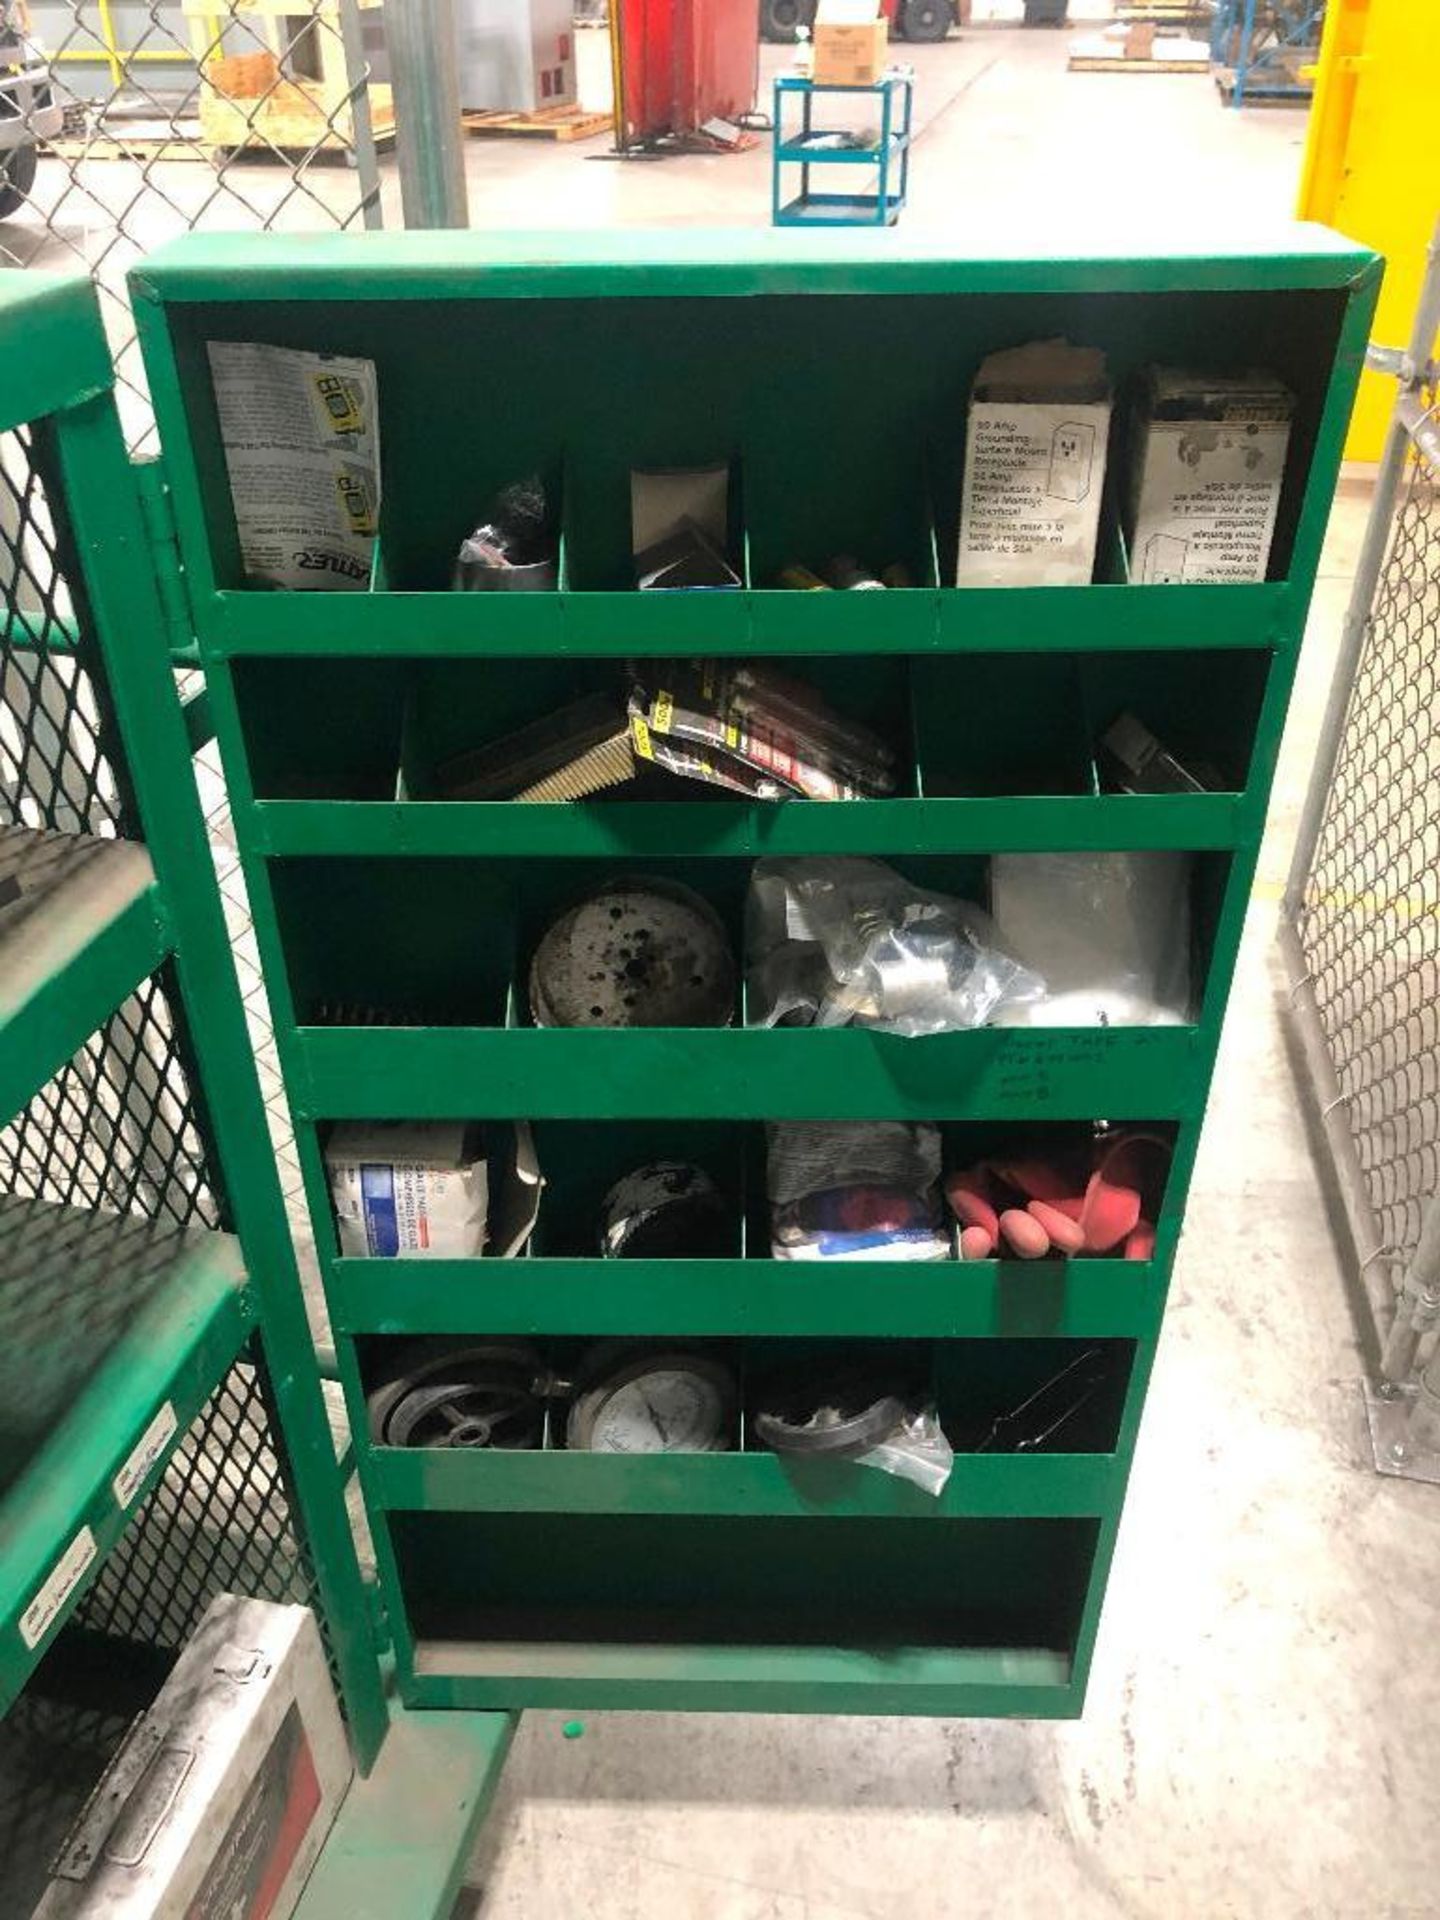 Greenlee Mesh Utility Cabinet w/ Asst. Contents including Hard Hats, First Aid Kit, etc. - Image 5 of 5